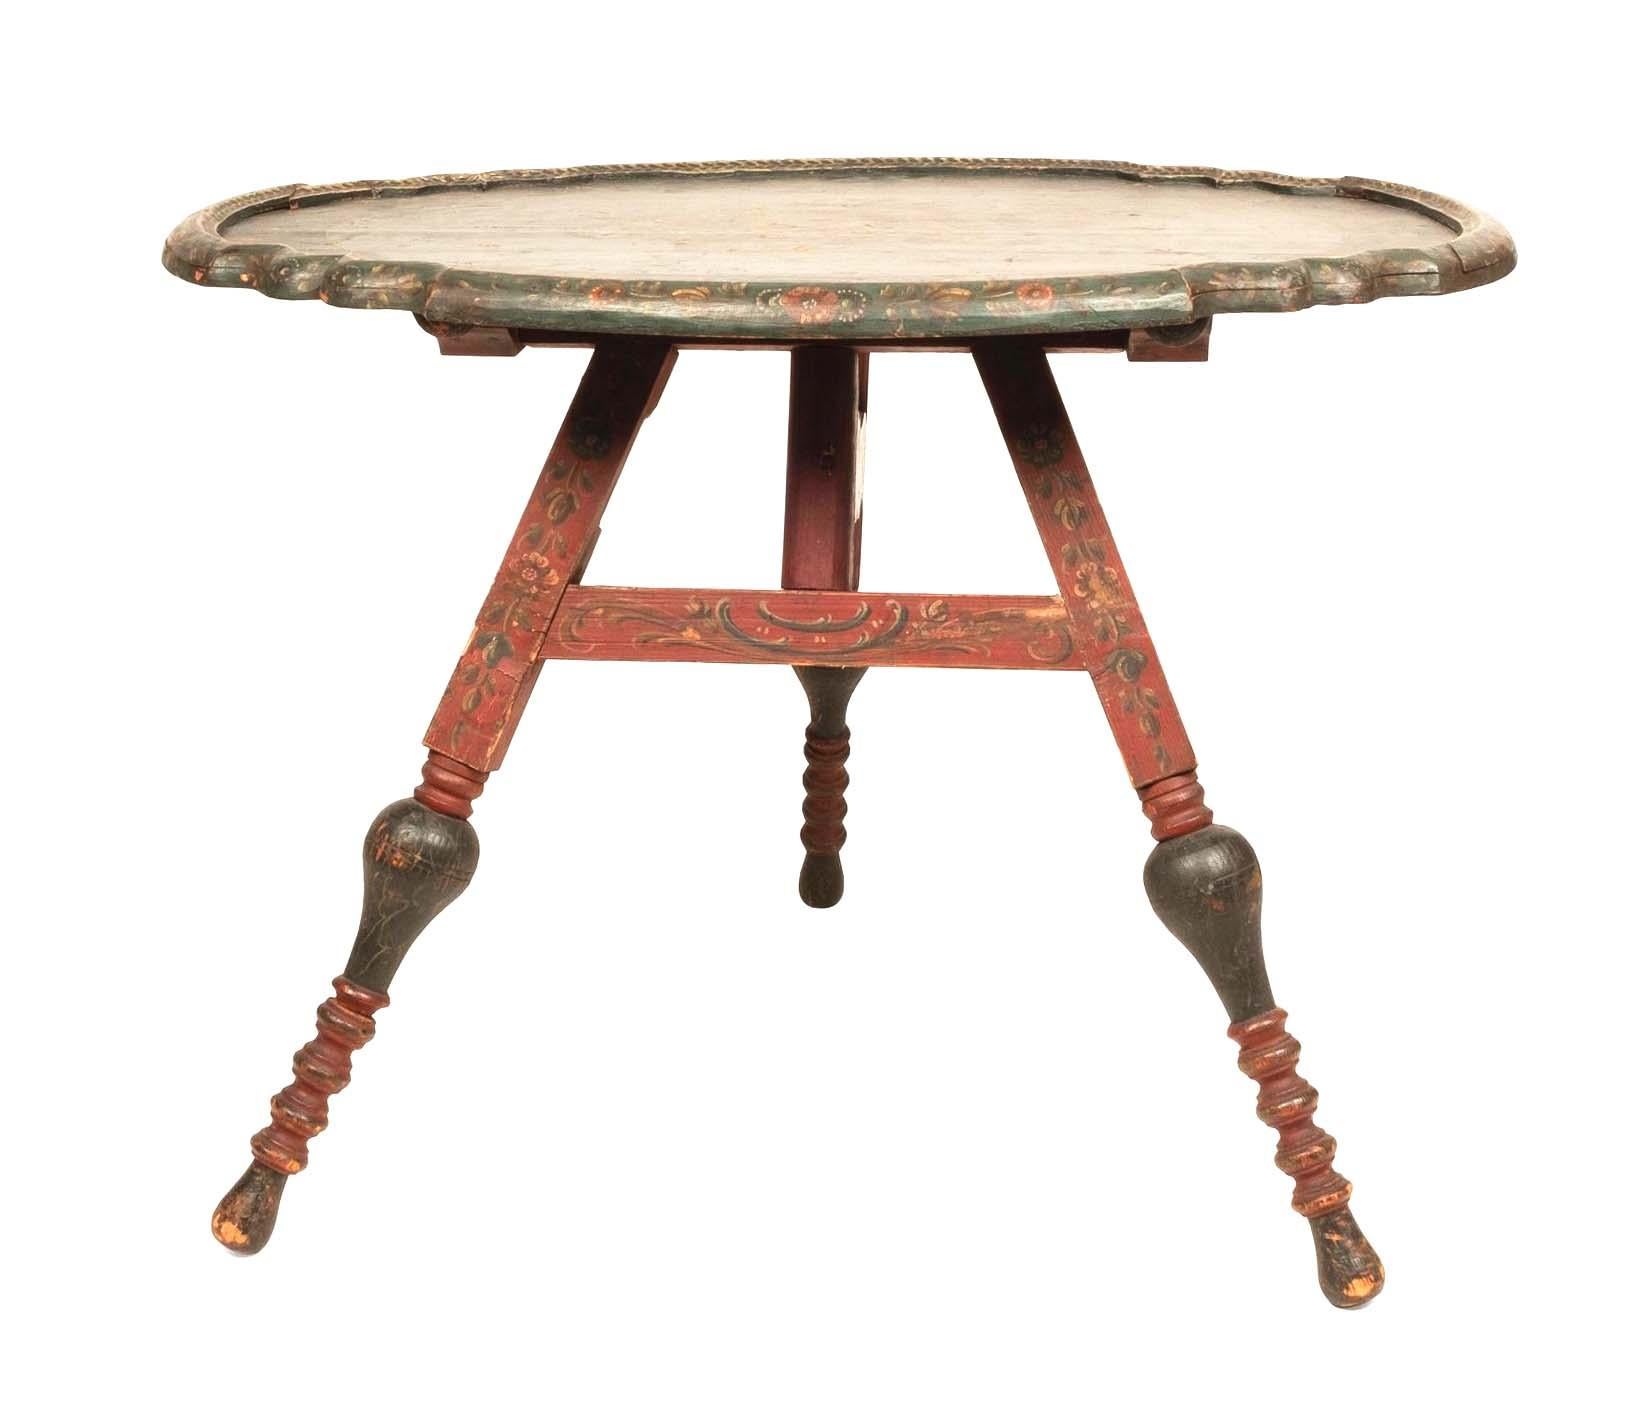 Rare antique Dutch green painted oval tilt top table, Pennsylvania, 19th Century.
The top features hand painted floral designs. The bottom features red paint with carved figural supports and a central hand painted religious scene.

Dimensions
21